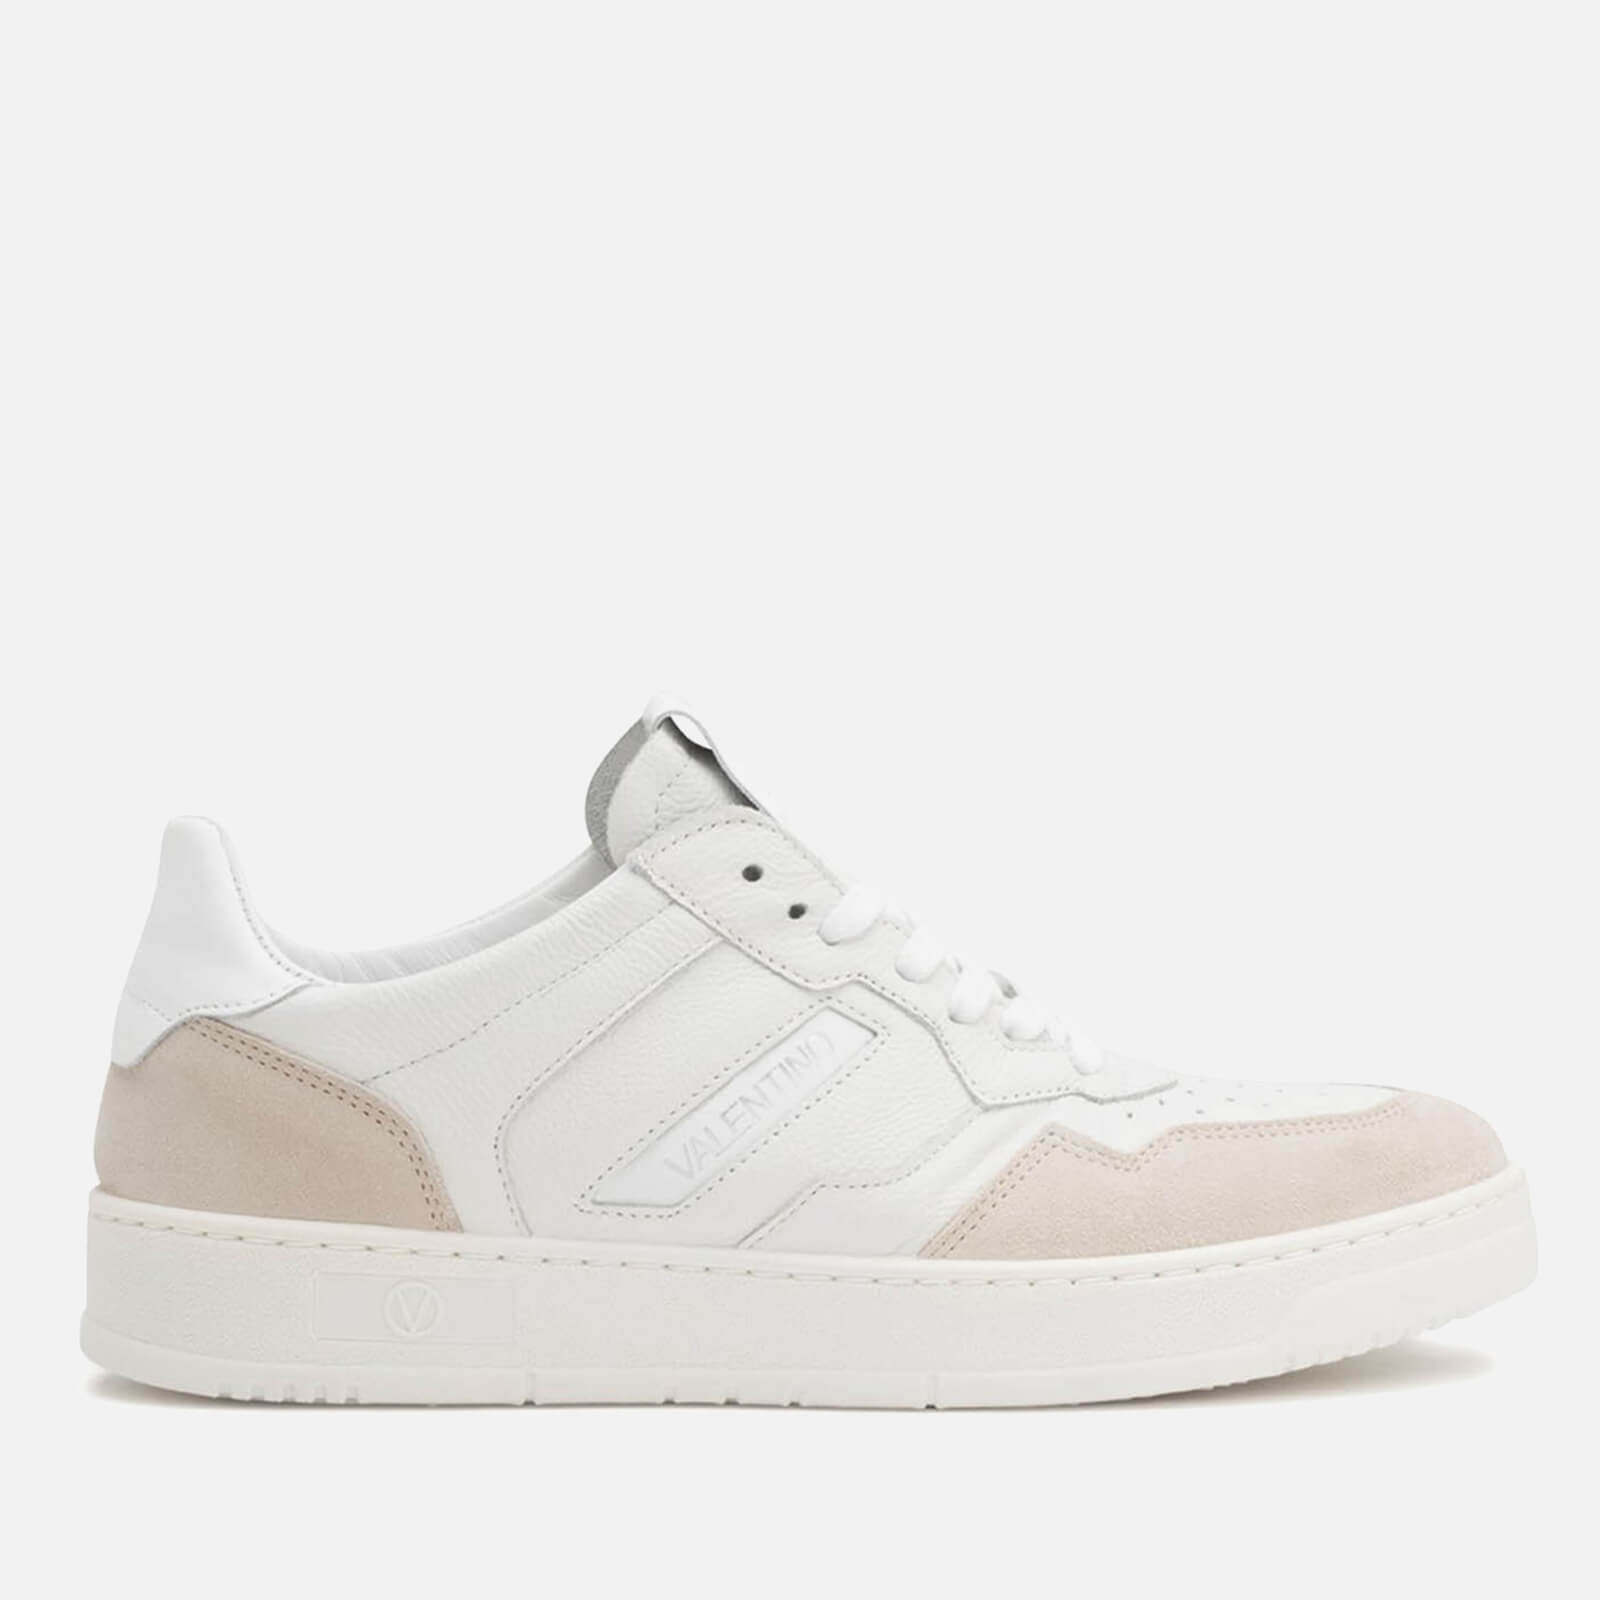 Valentino Men’s Apollo Basket Leather and Suede Trainers